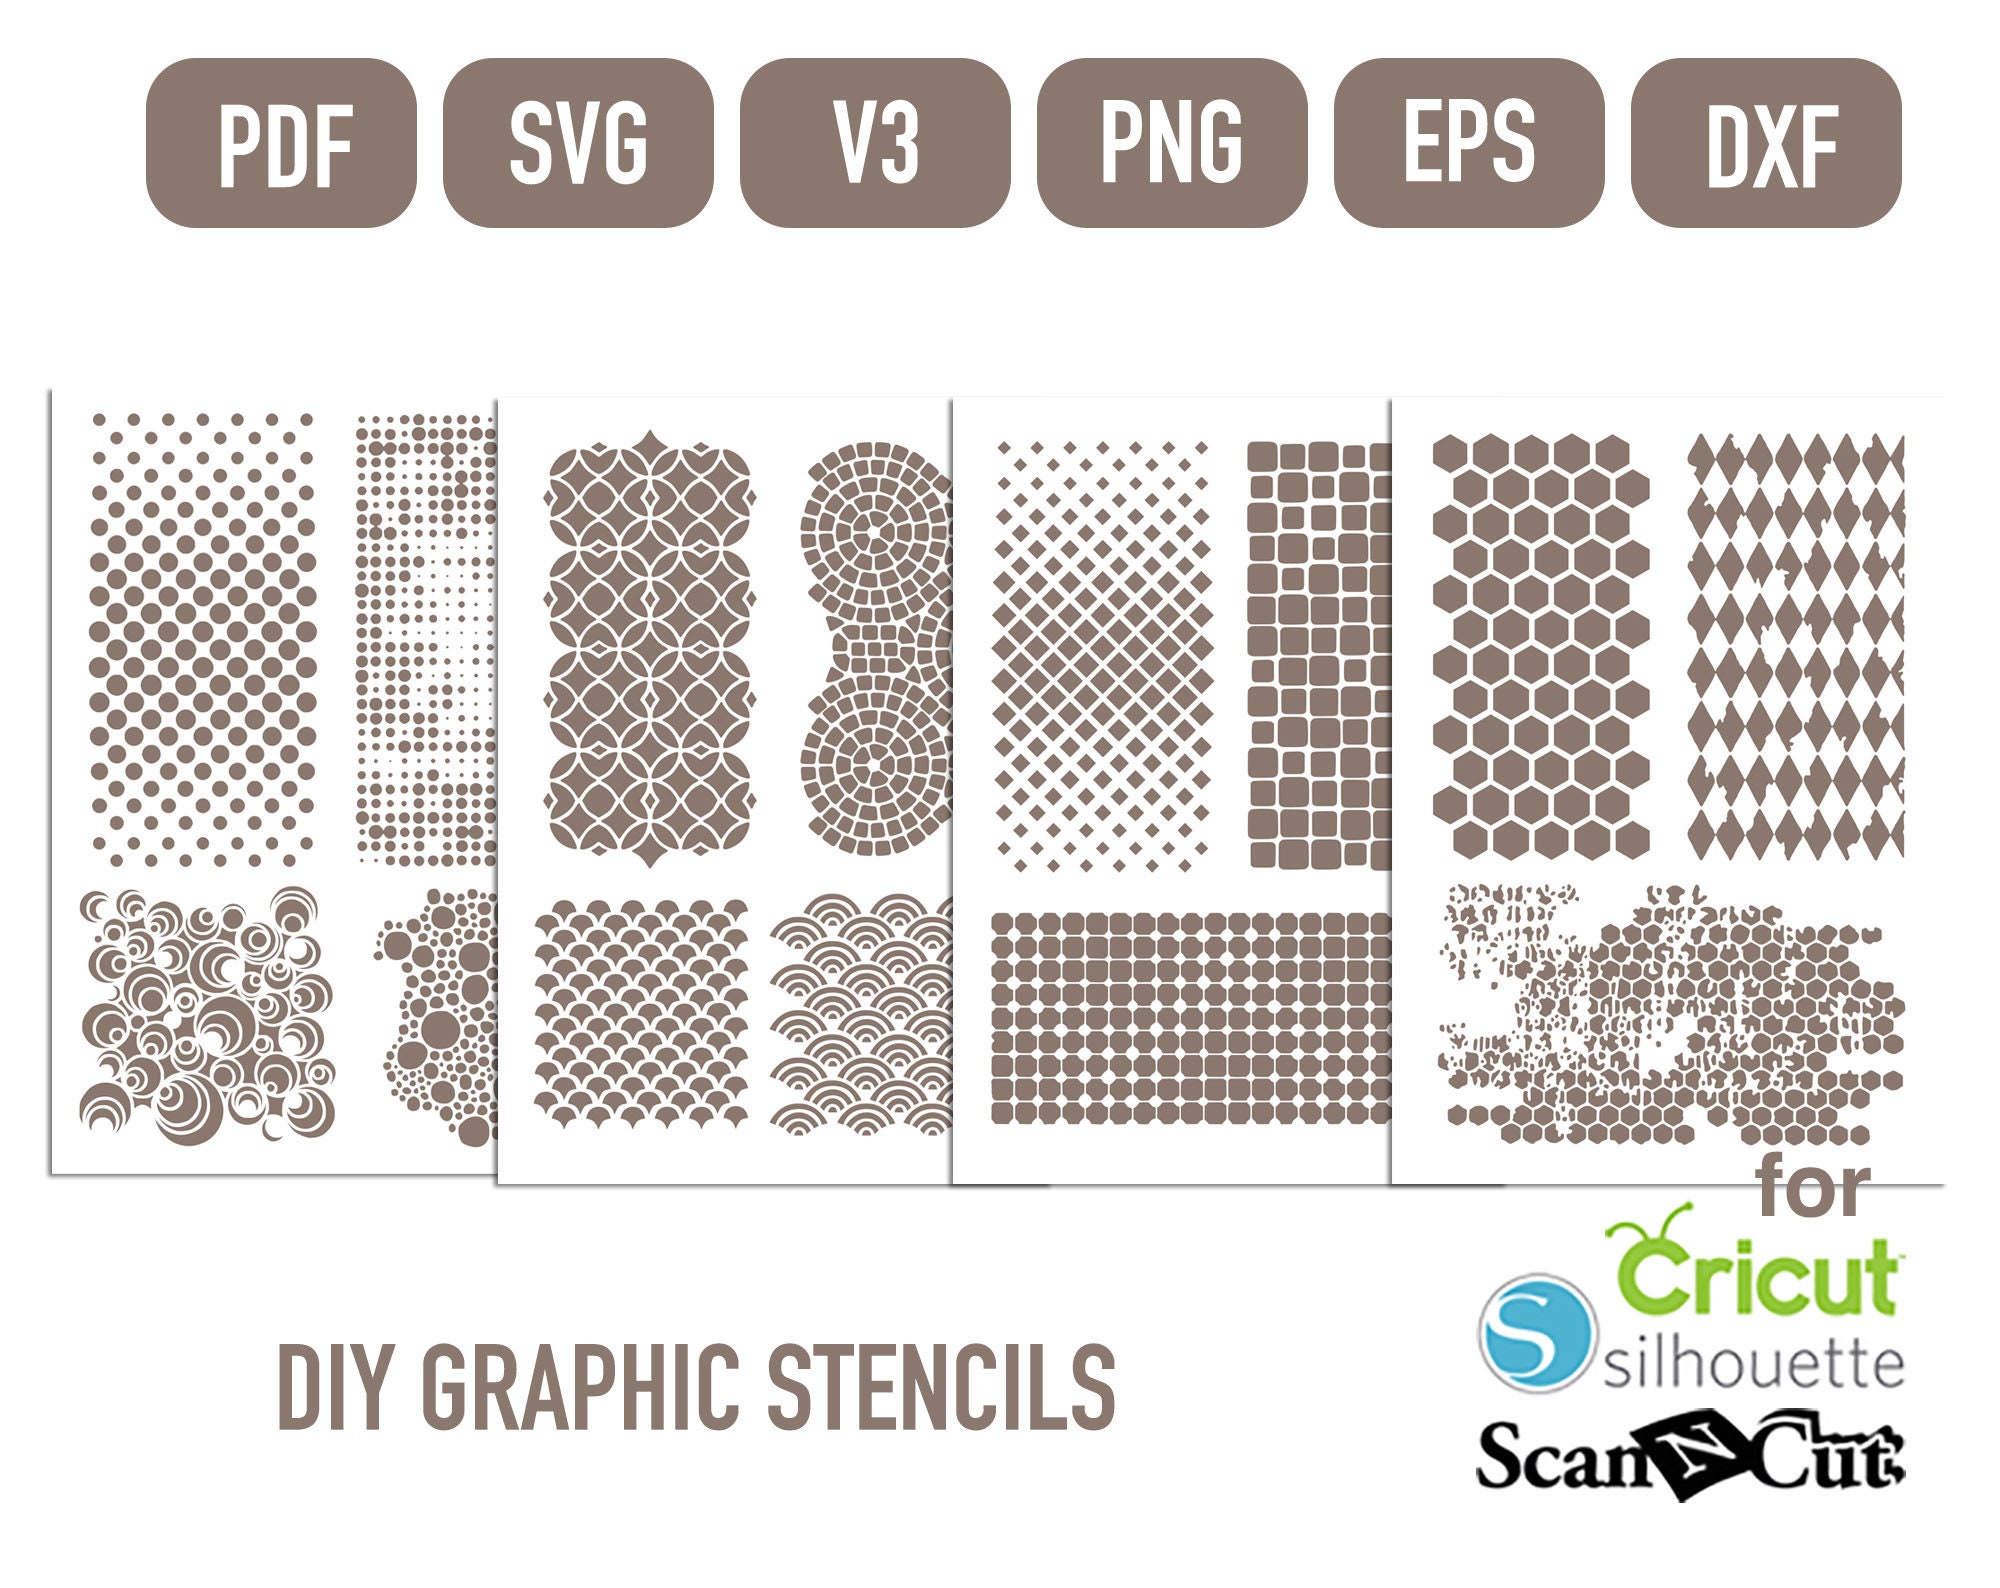 Disney Seamless Pattern Louis Vuitton SVG, PNG, DXF, EPS, Cut Files, For Cricut And Silhouette